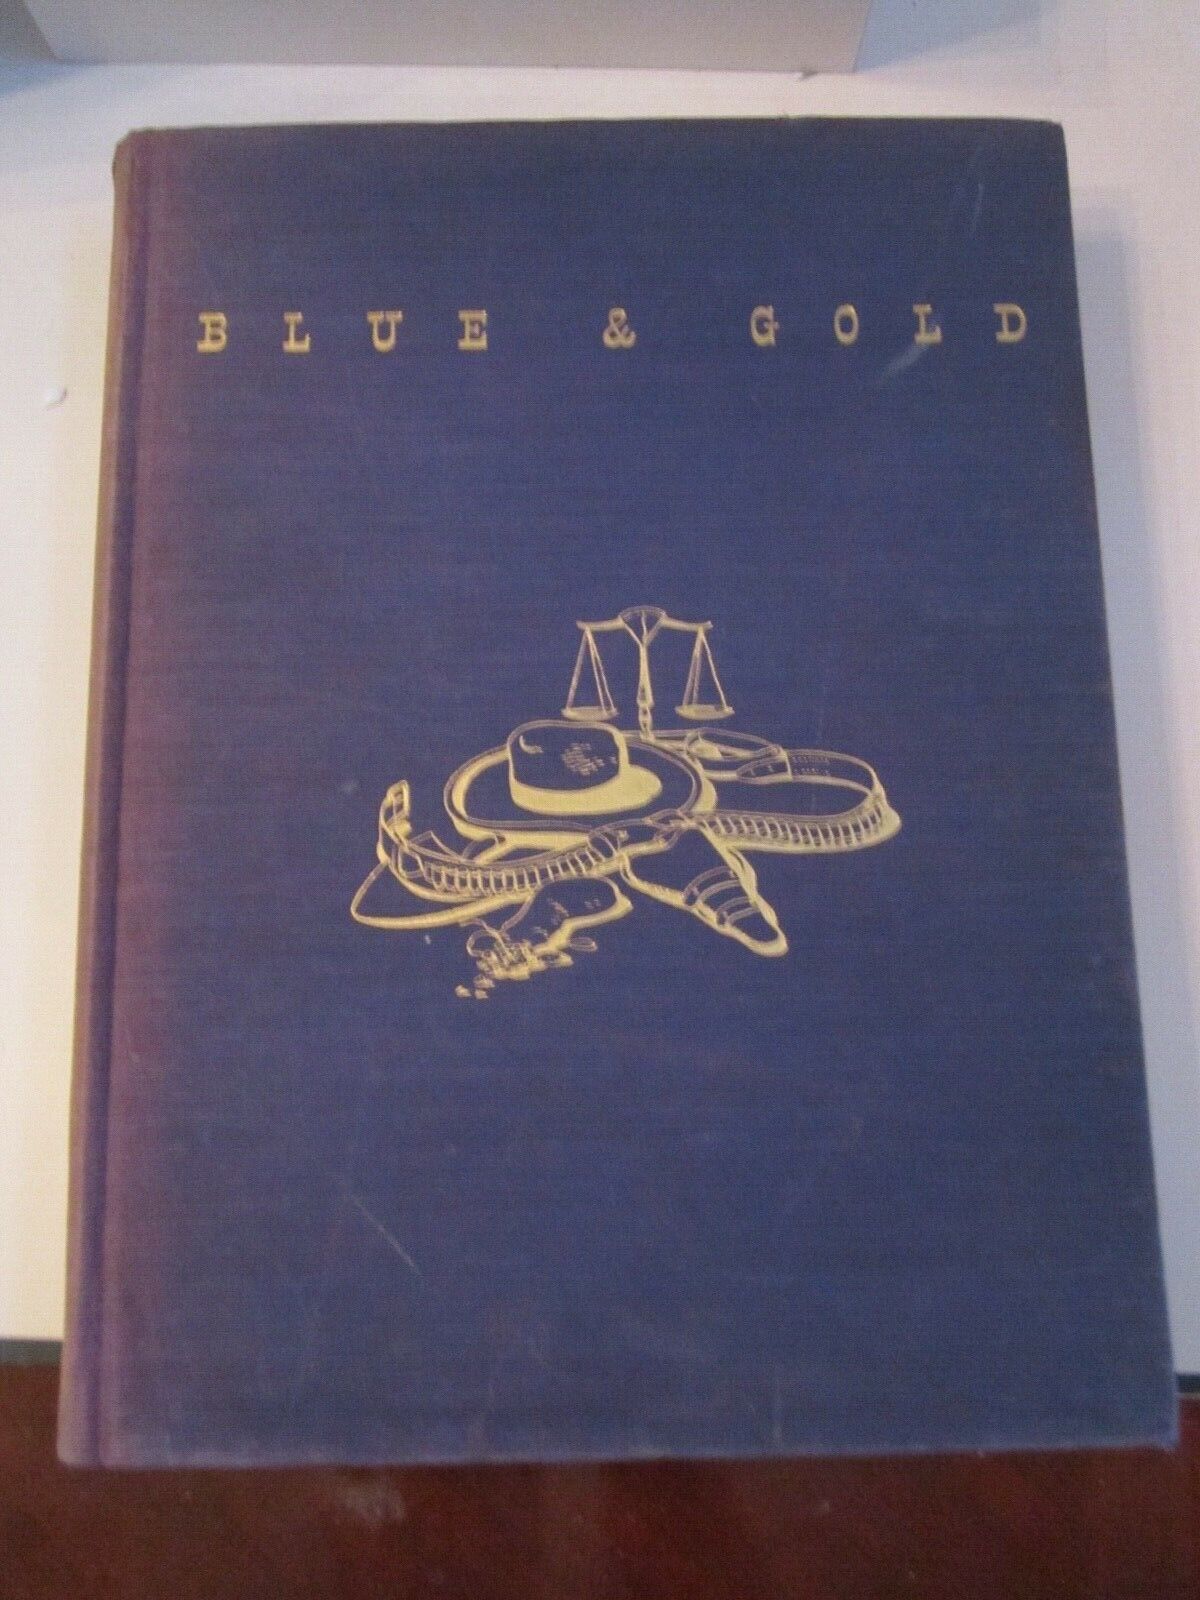 1936 THE UNIVERSITY OF CALIFORNIA YEAR BOOK - BLUE AND GOLD - VERY HEAVY